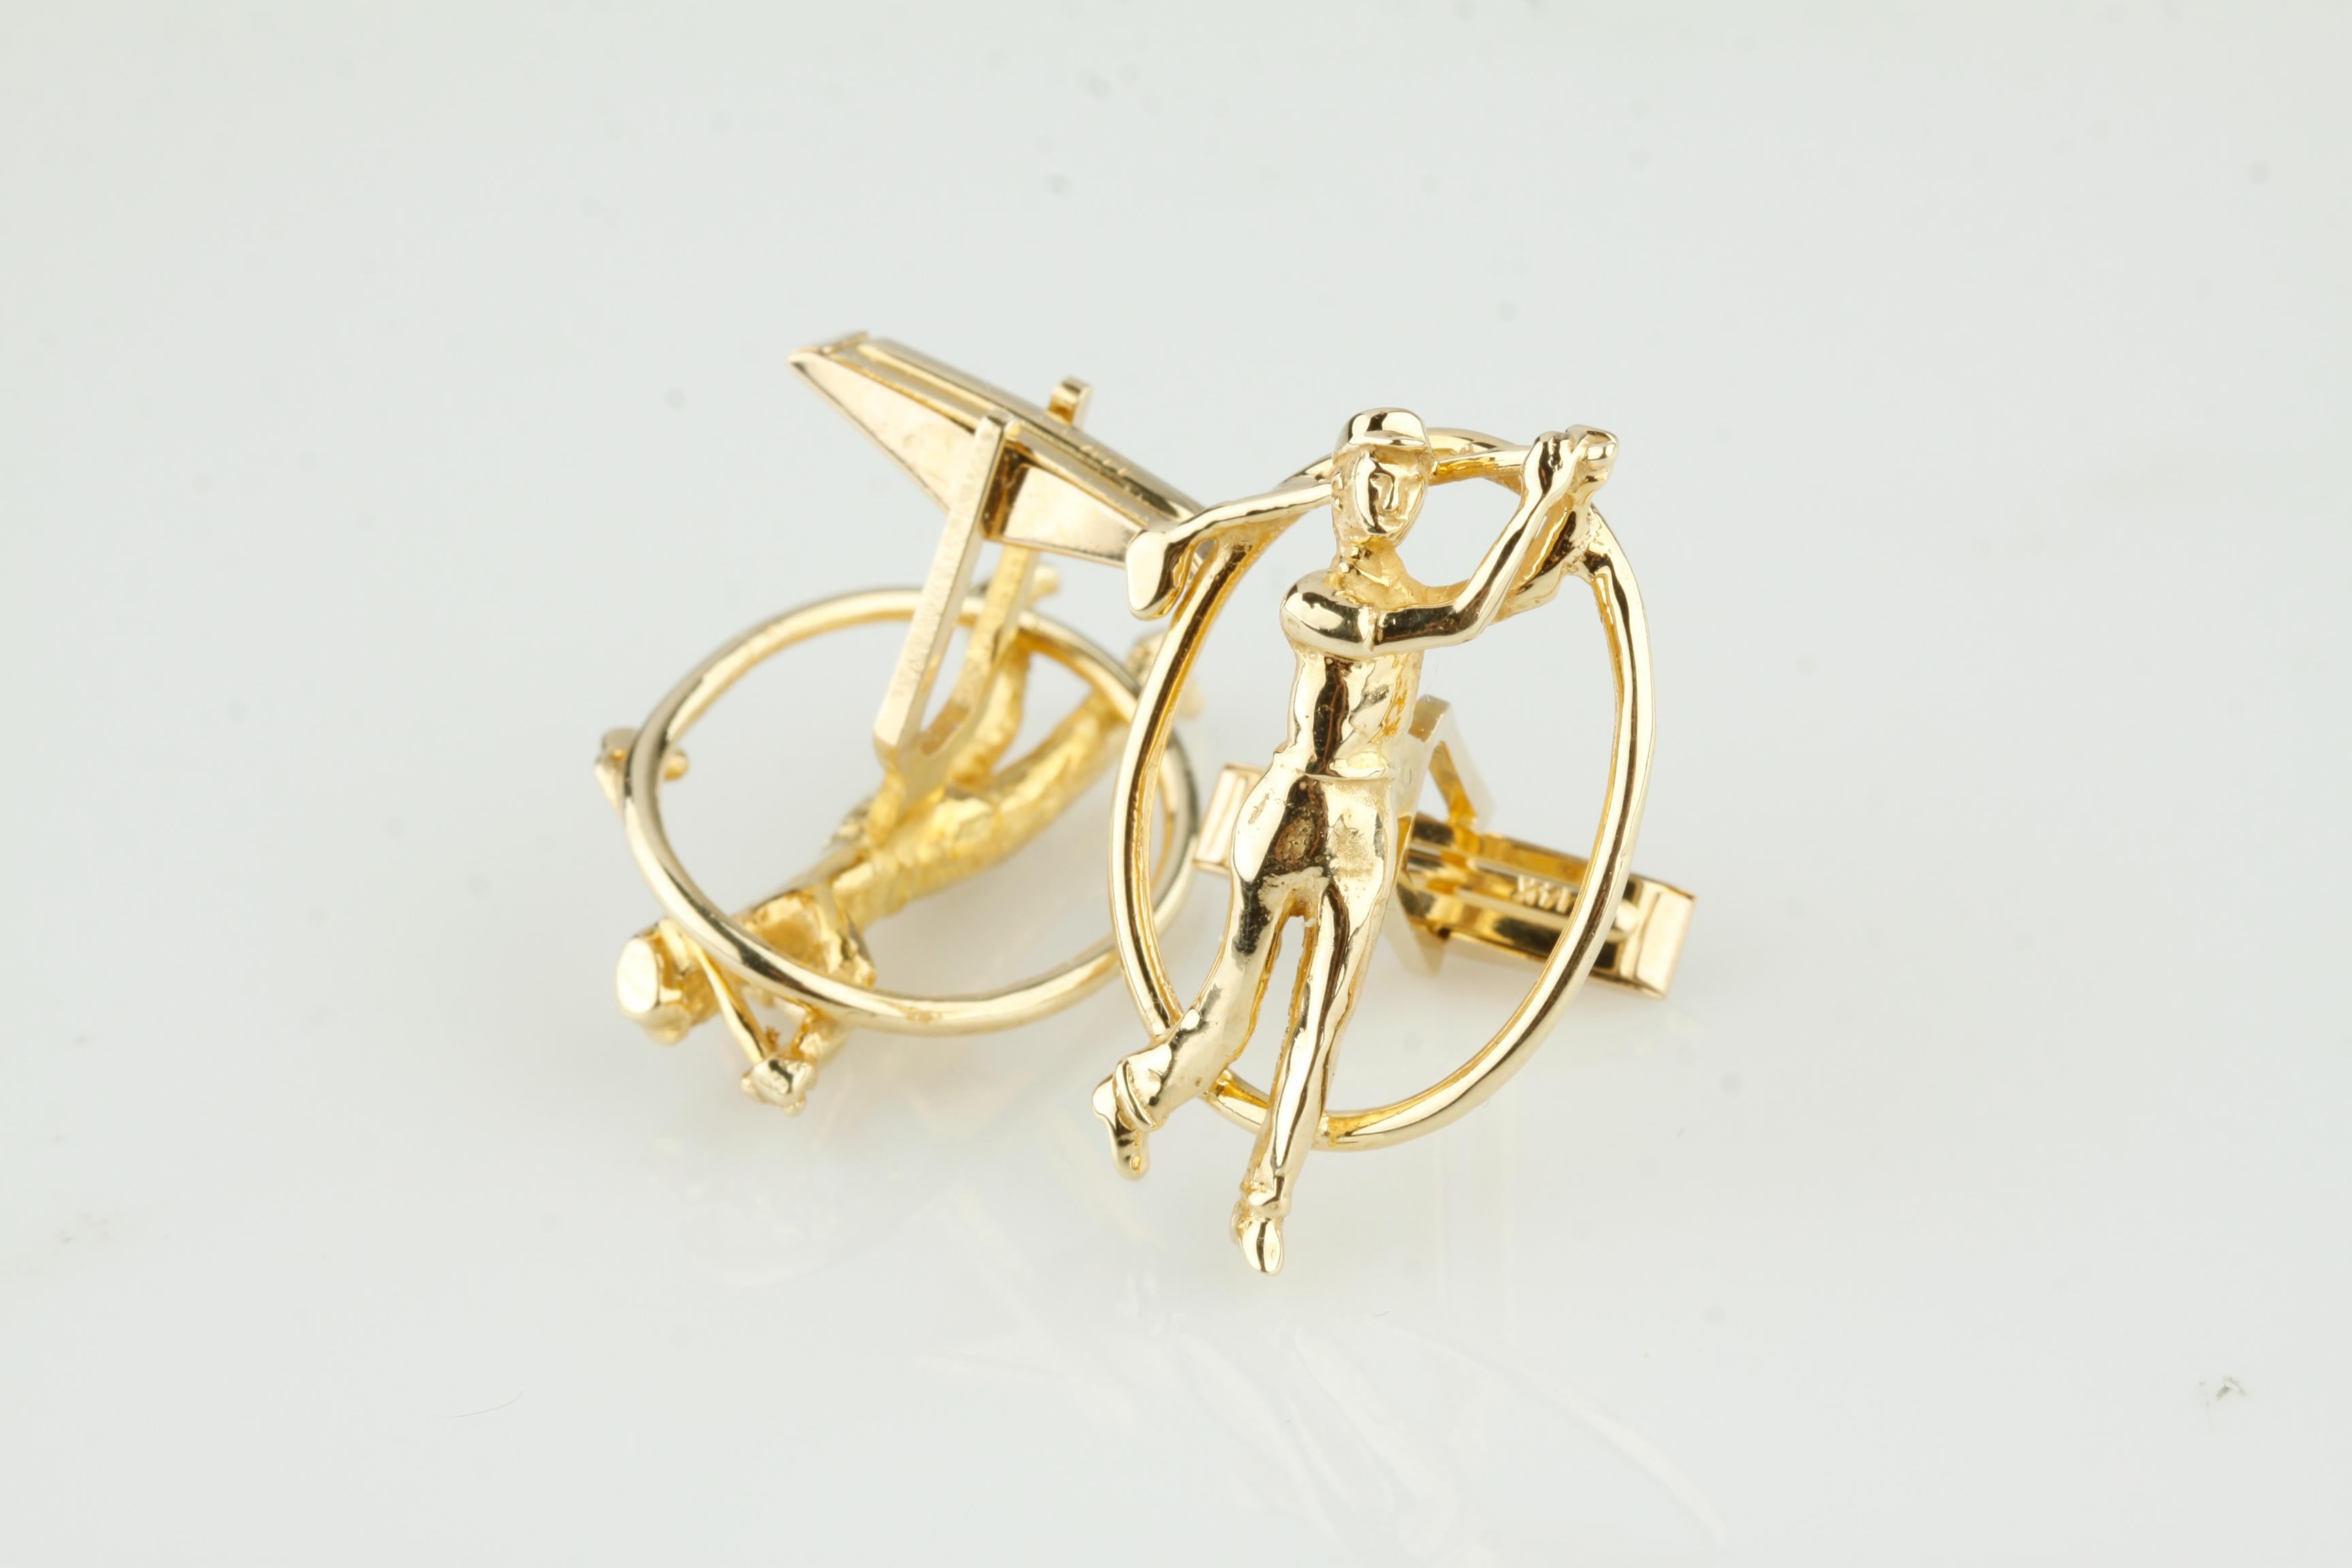 Unique Golf Player Design Cufflinks in 14 Karat Yellow Gold 14.1 GR In Good Condition For Sale In Sherman Oaks, CA